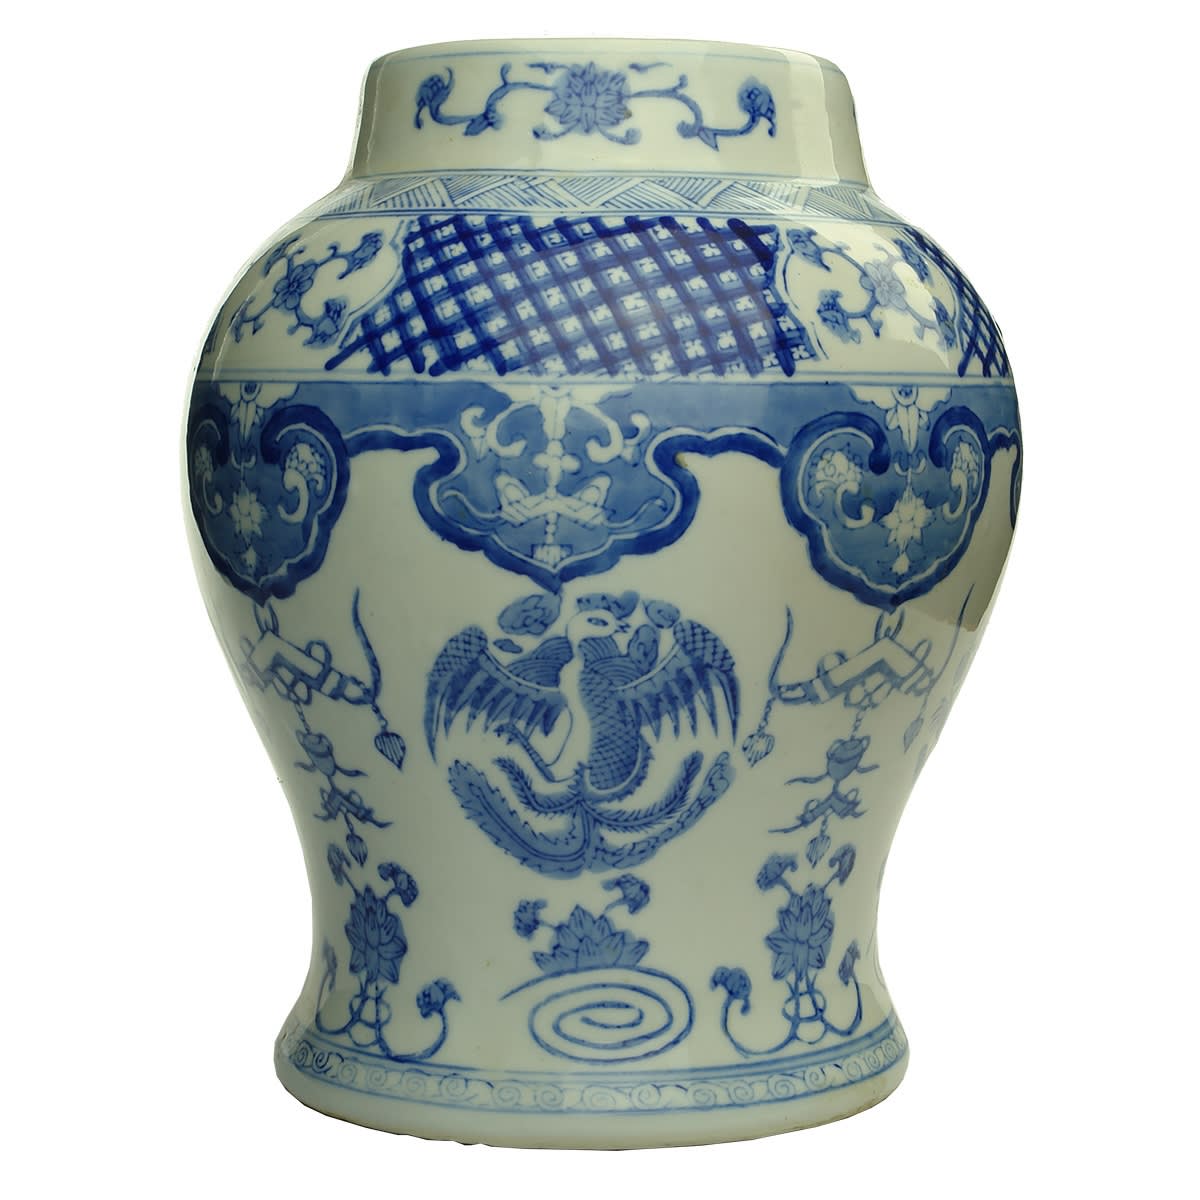 Chinese. Blue and White Chinese Temple Jar With Pheasants and Dragons with characters inside.